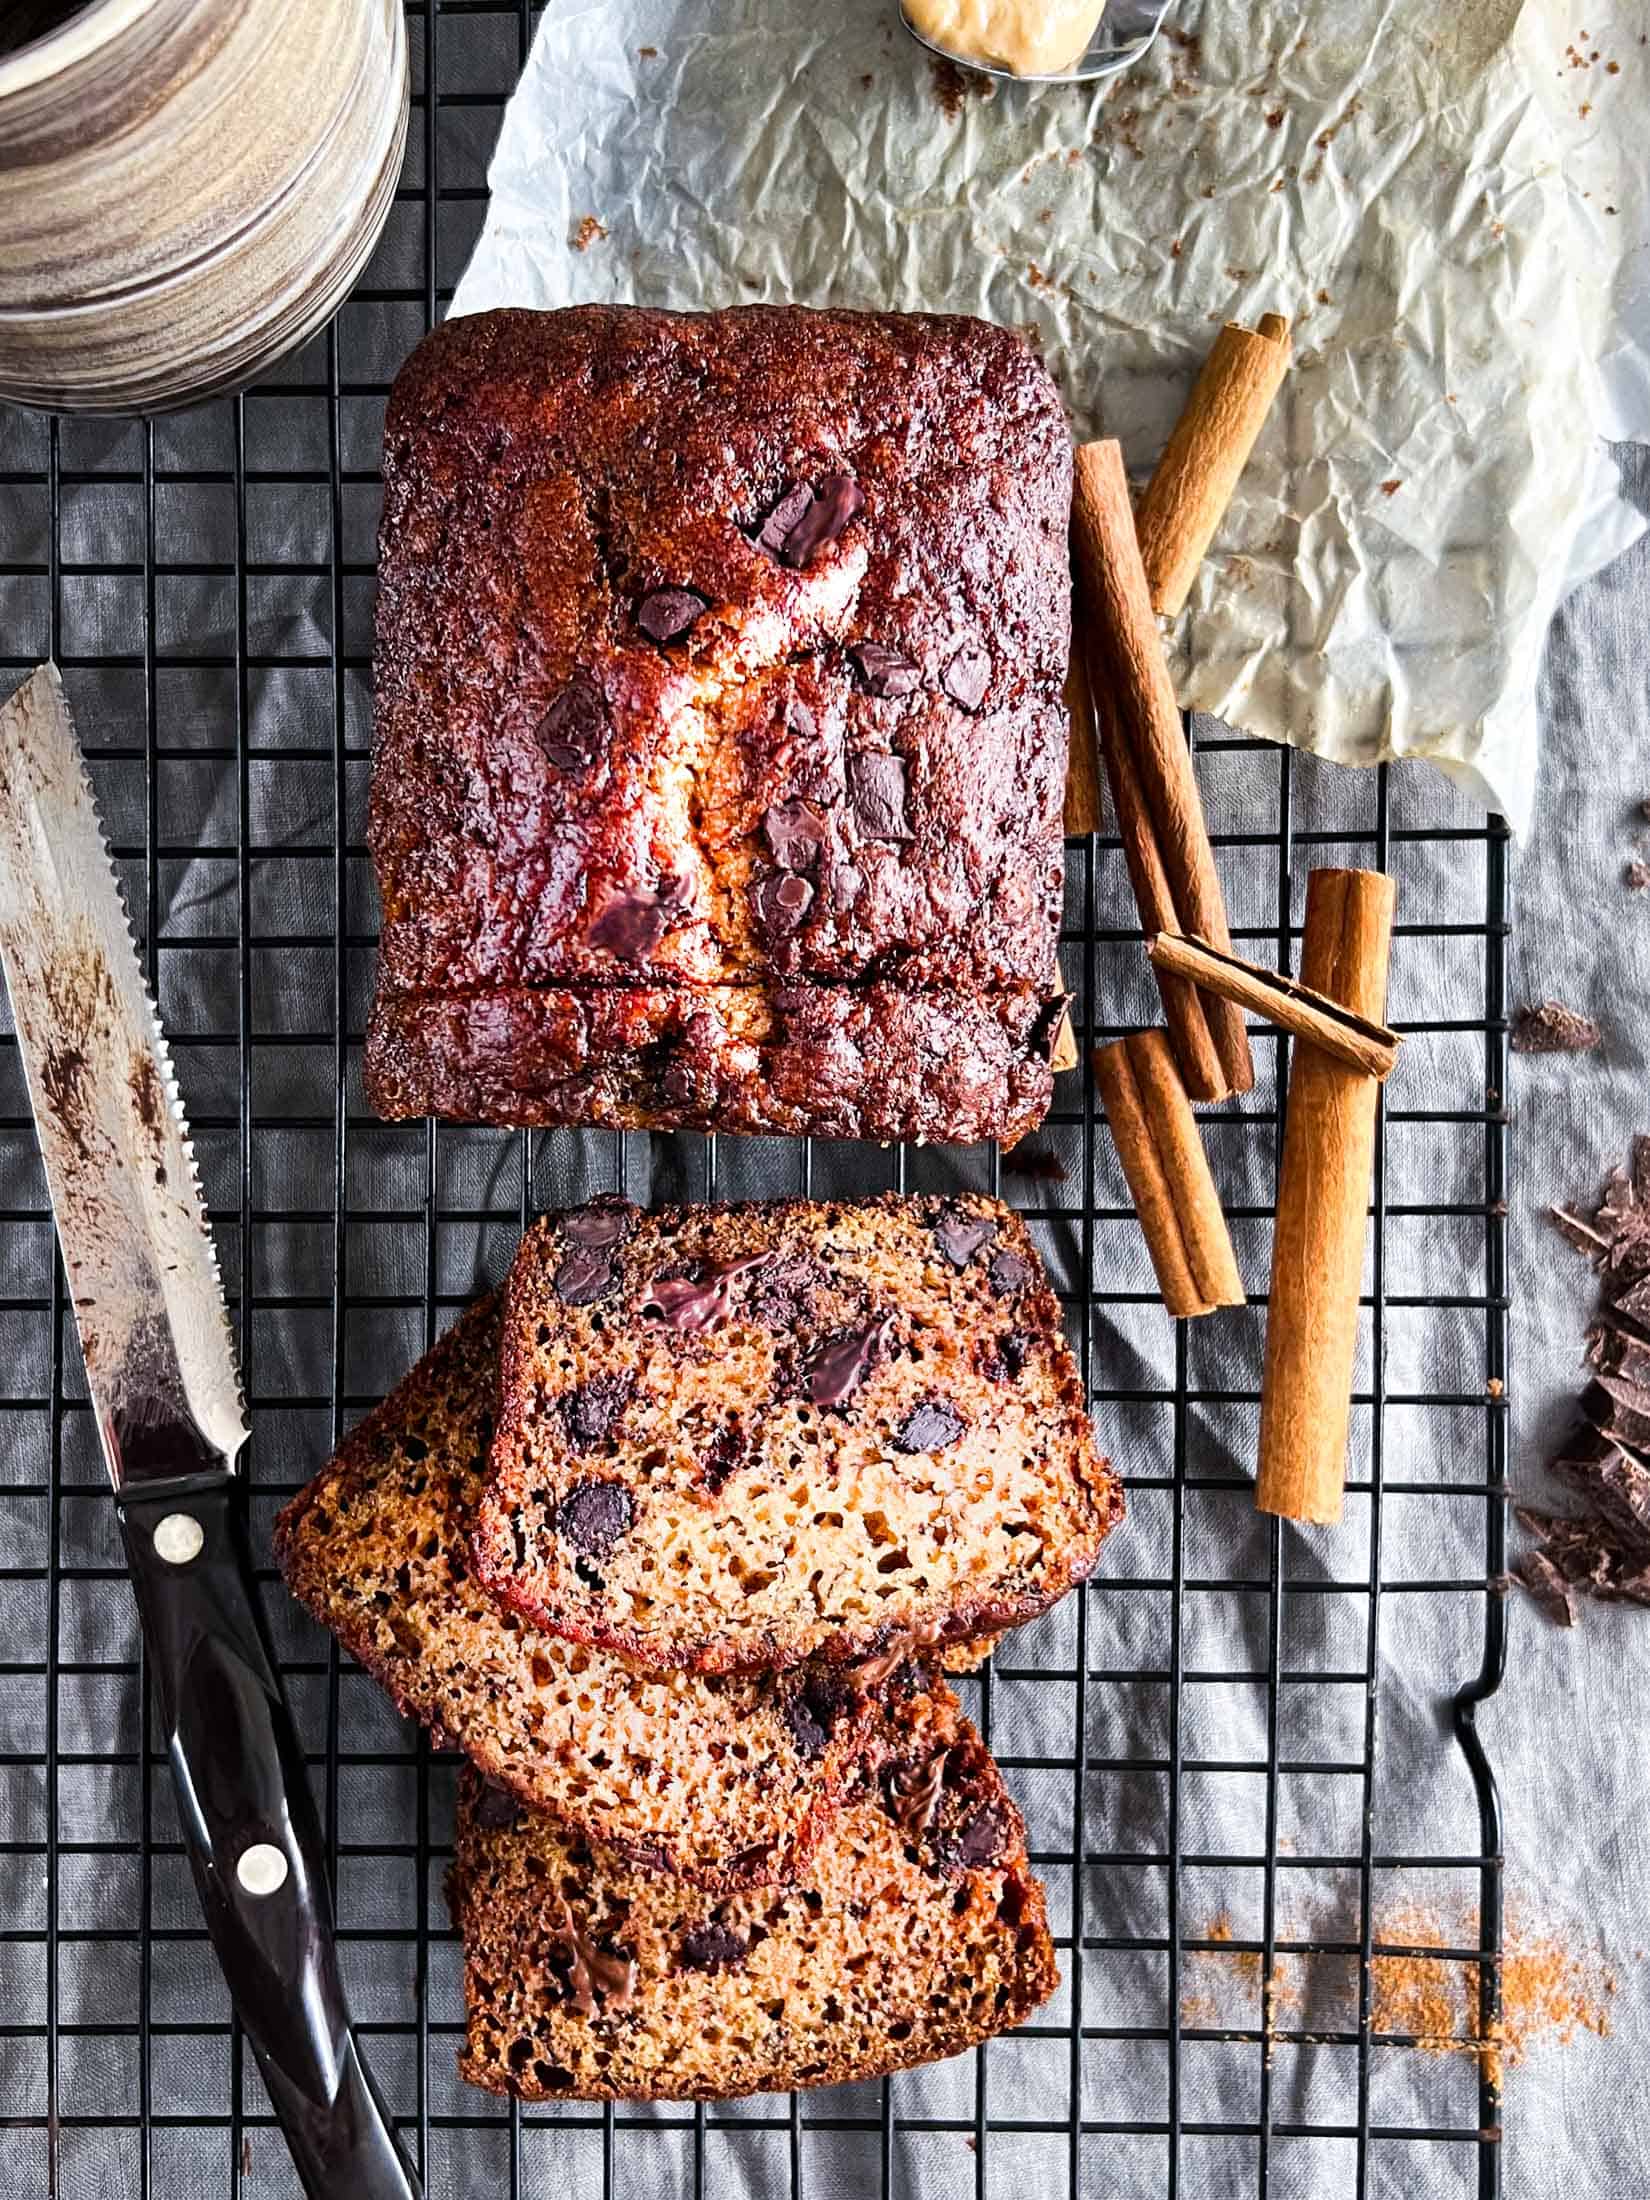 Banana bread without butter baked and sitting on a piece of parchment and cooling rack with cinnamon sticks, a chocolate smeared knife, and cinnamon sprinkled in the background.